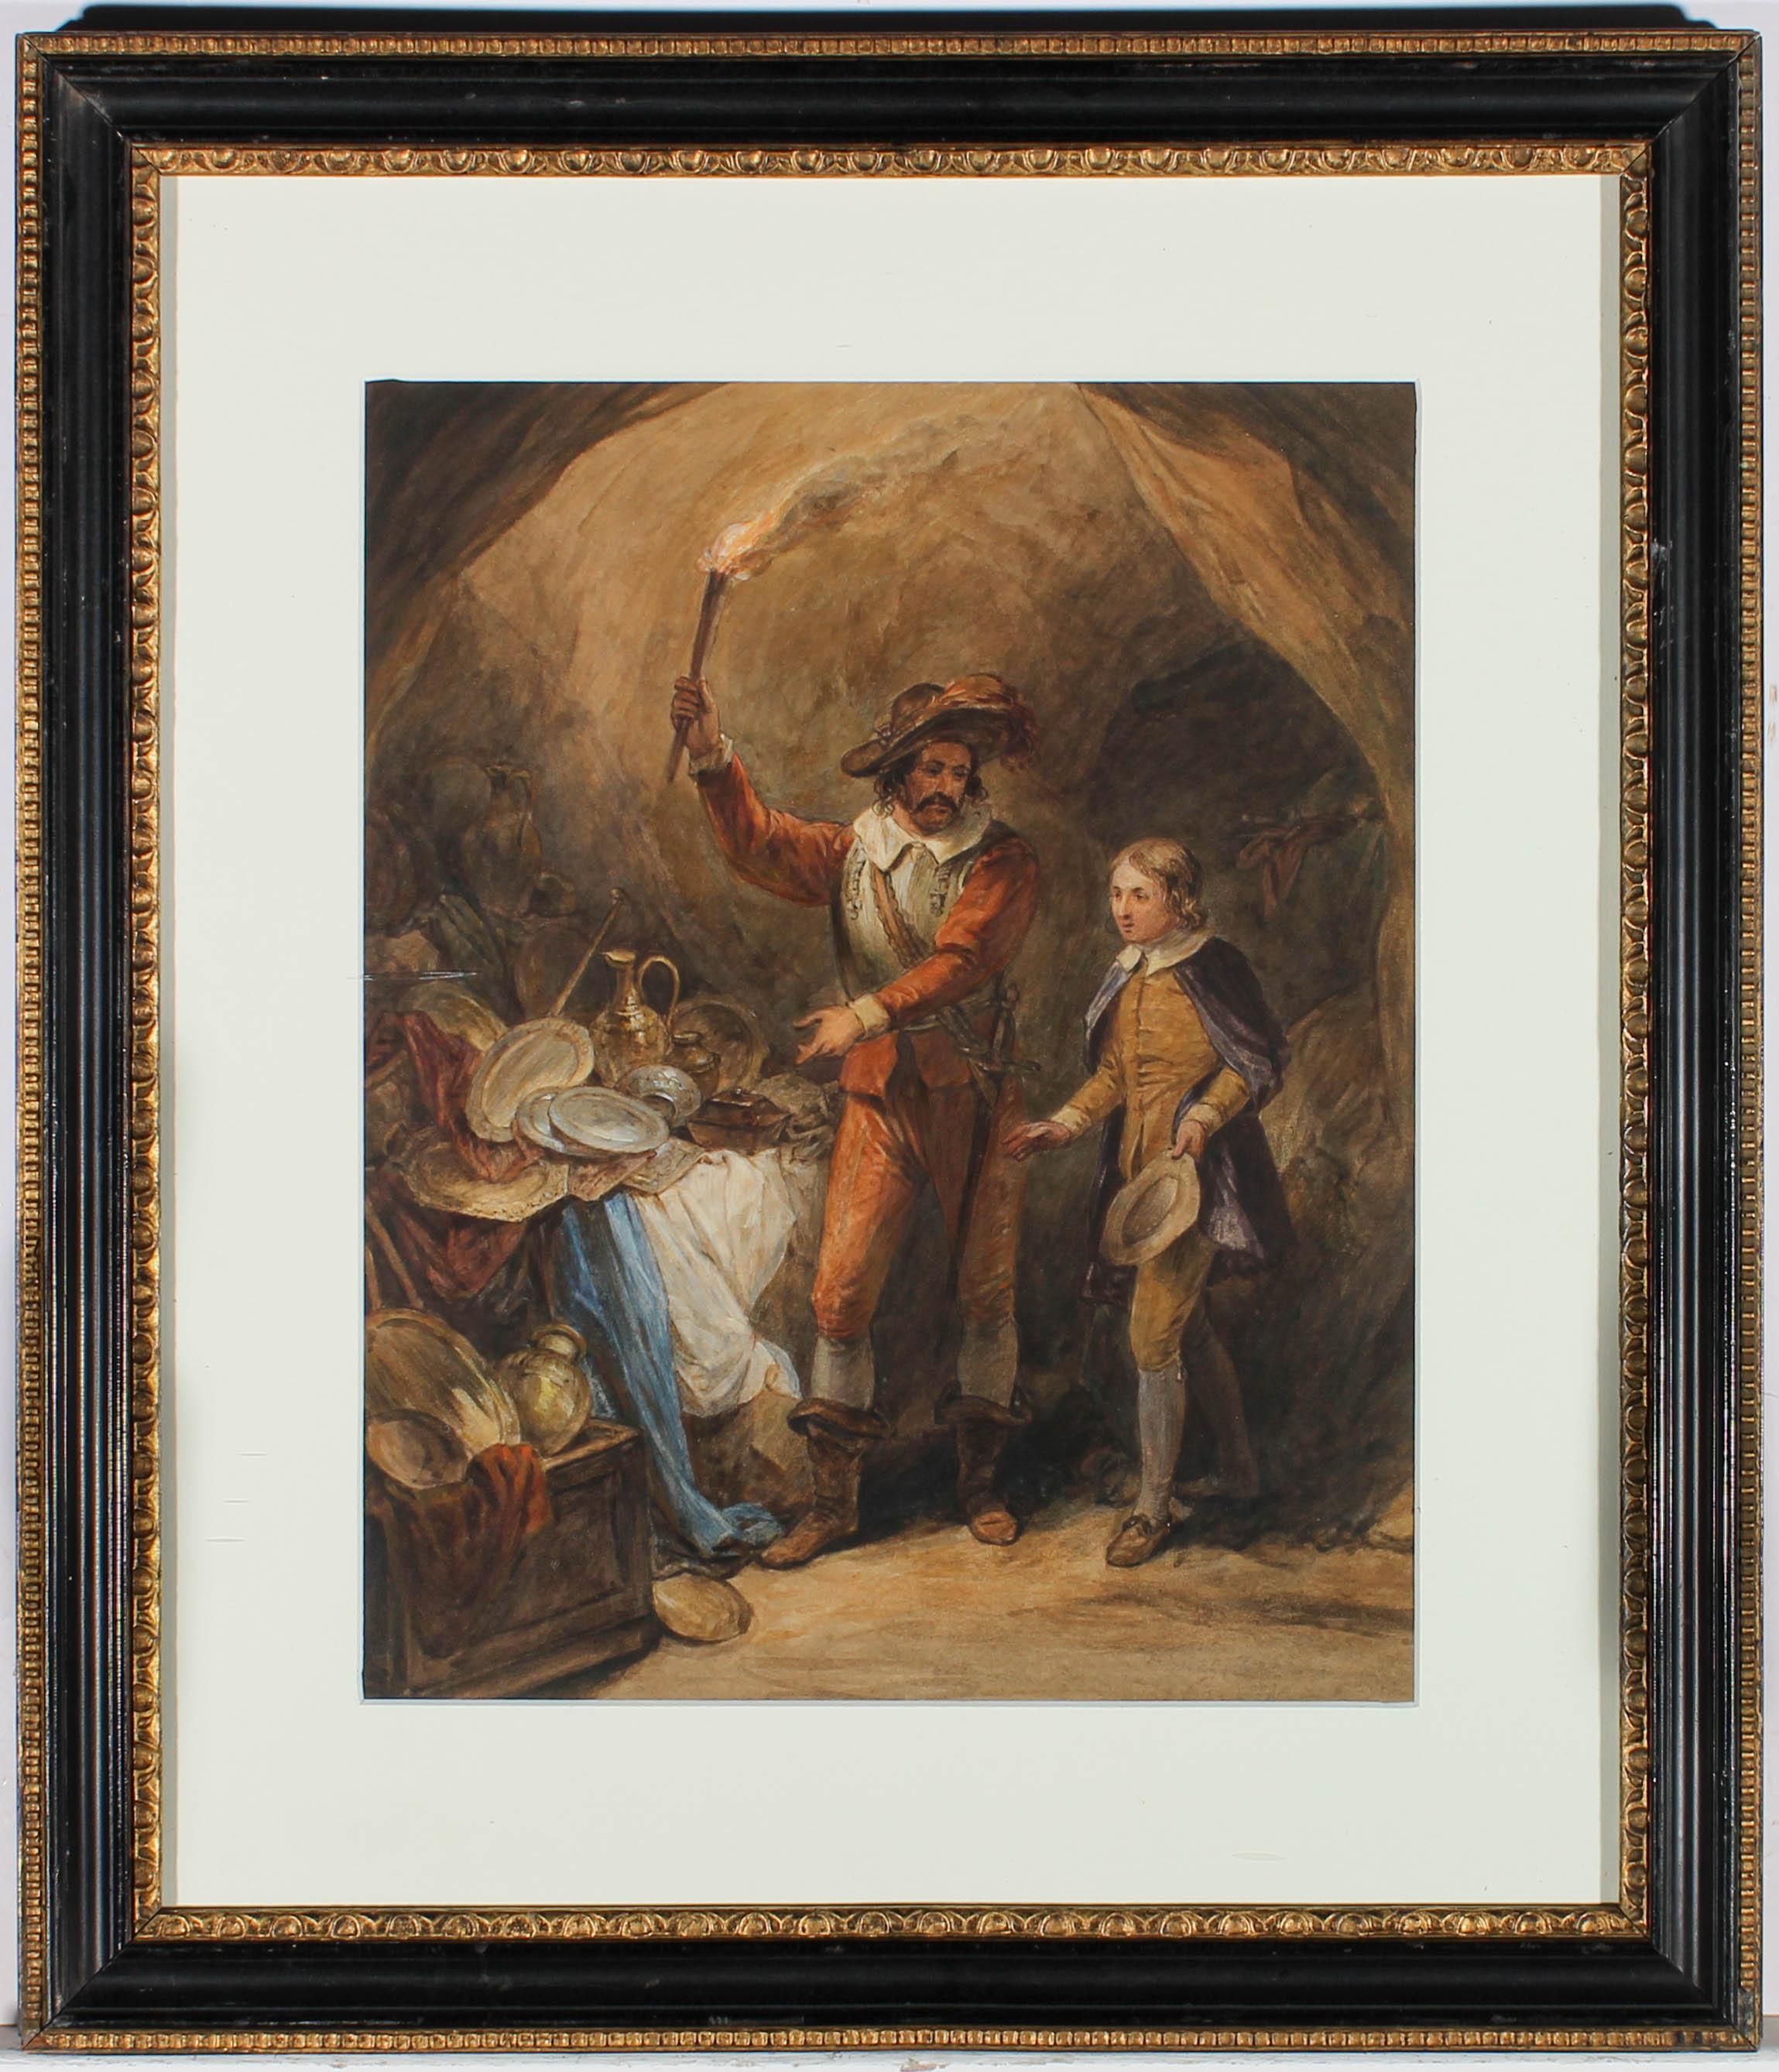 A fascinating early 19th century watercolours of a young lord, accompanied by his paid explorer to a hoard of newly discovered treasure. Attached to the back of the frame, on a piece of card is the signature, John Massey Wright (1777-1866).